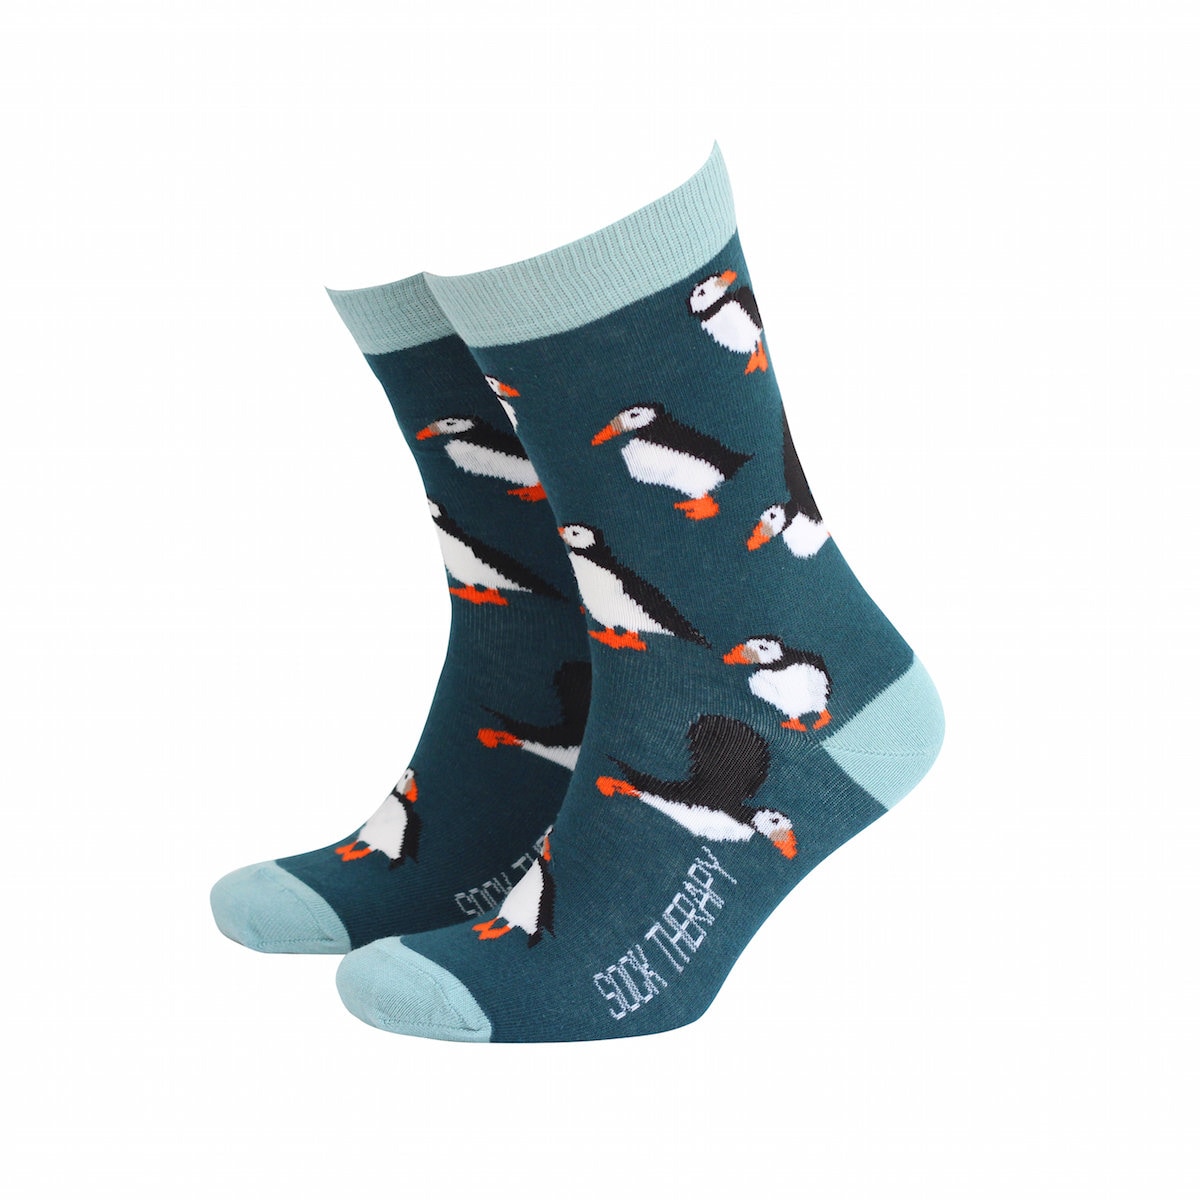 Puffin Bamboo Socks - Men’s Novelty By Smiling Faces